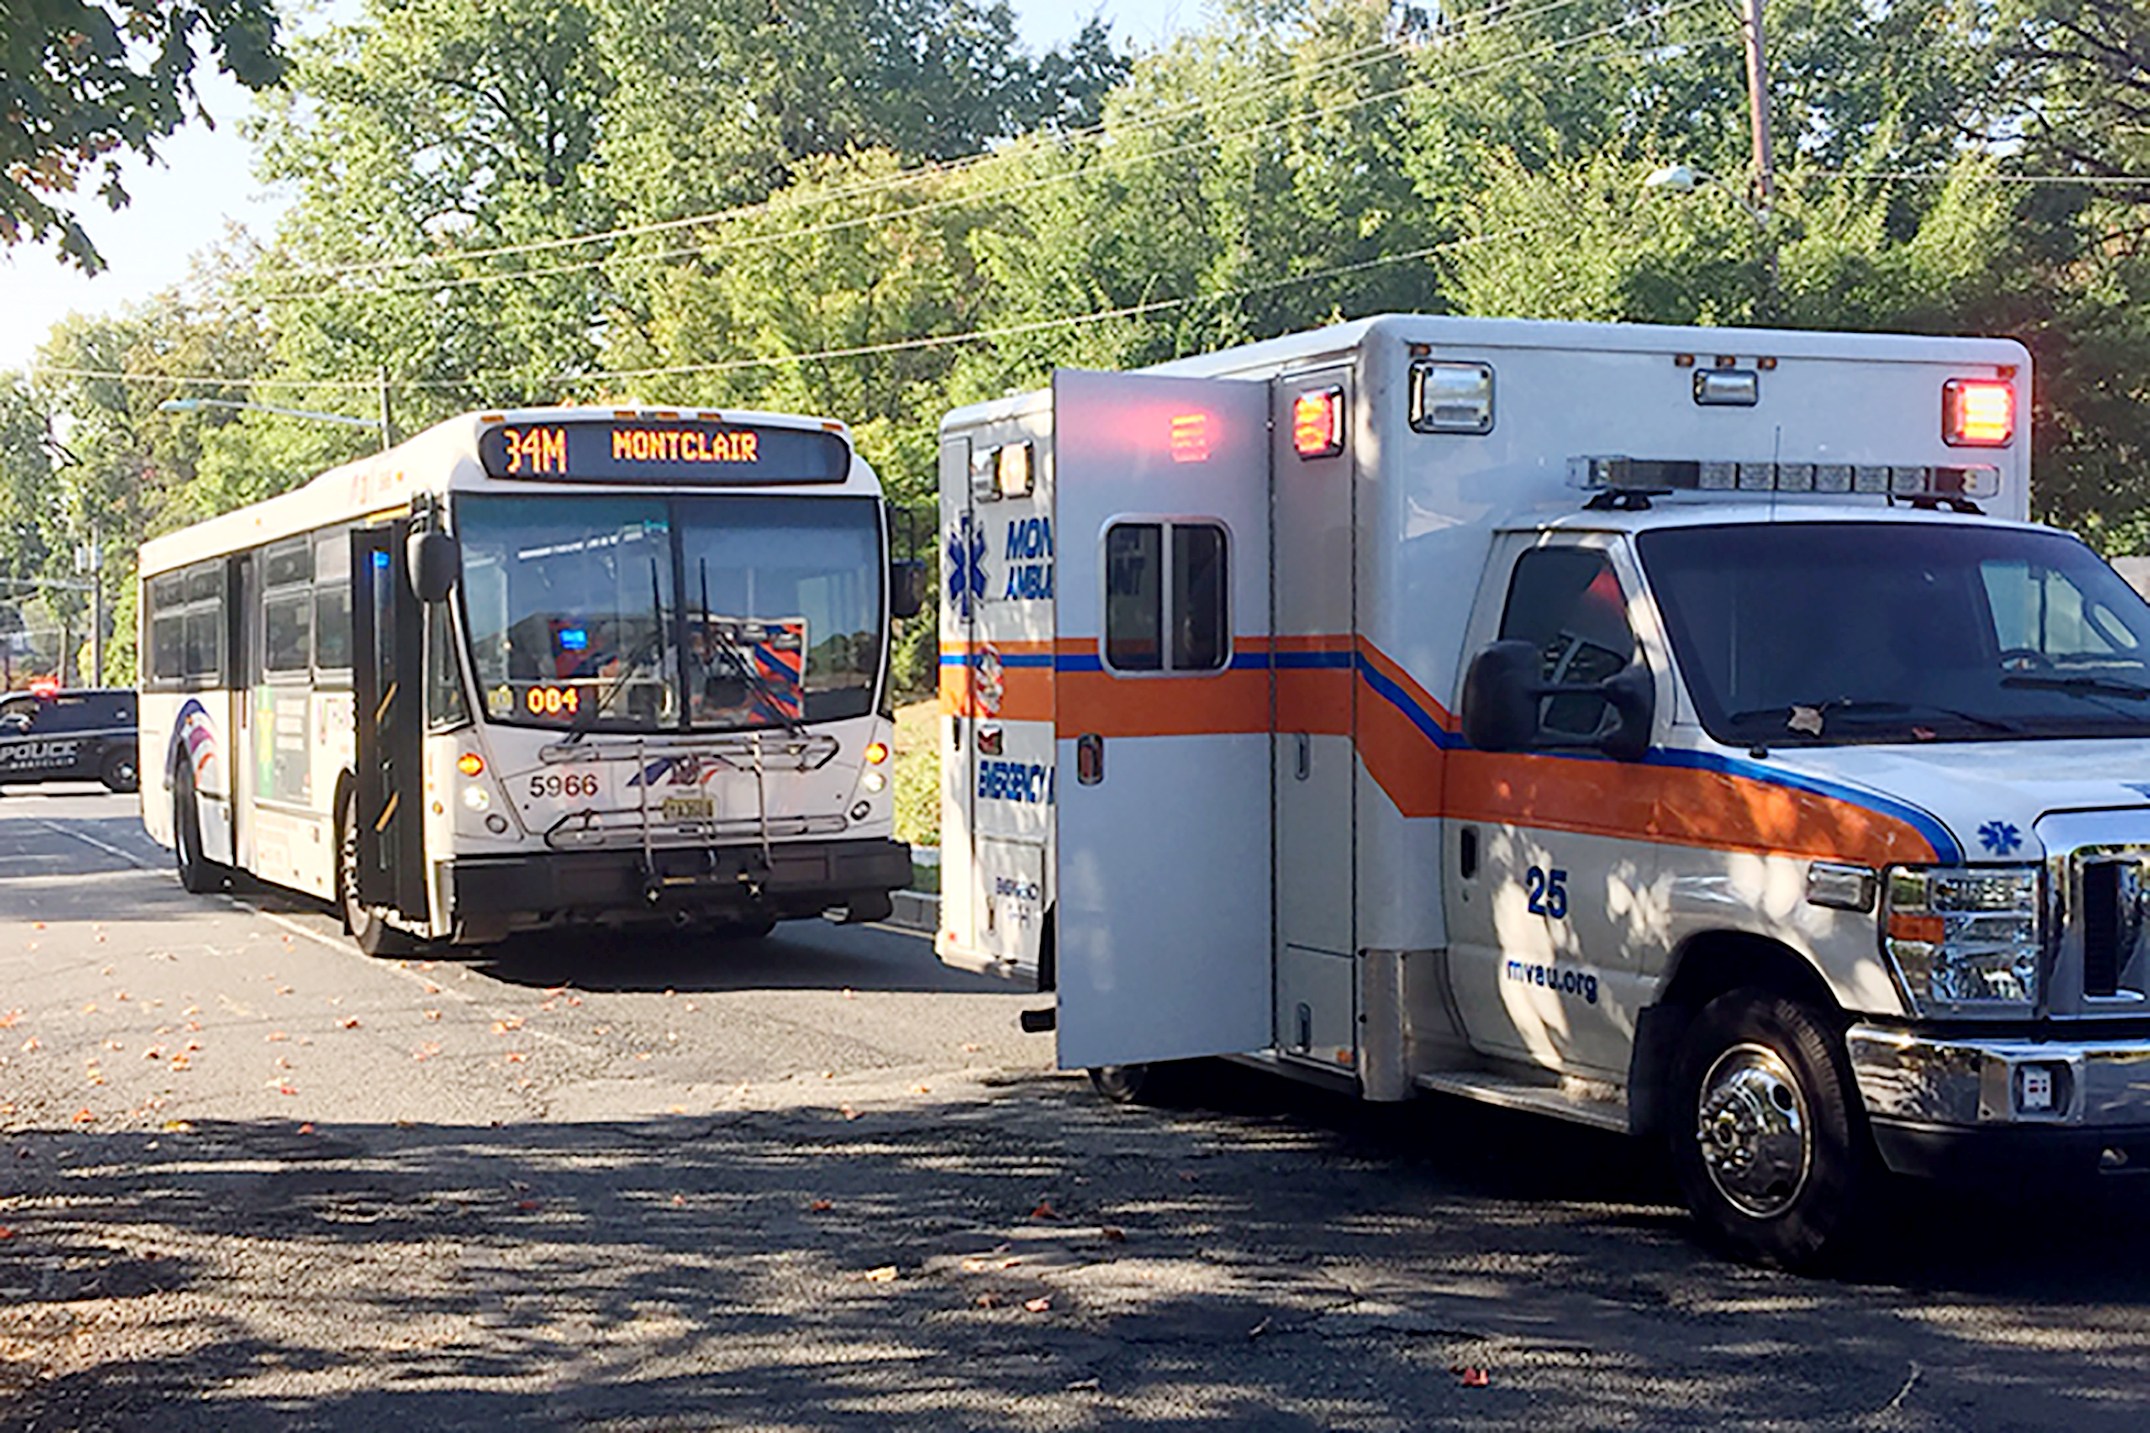 Woman injured when bus brakes suddenly in Montclair